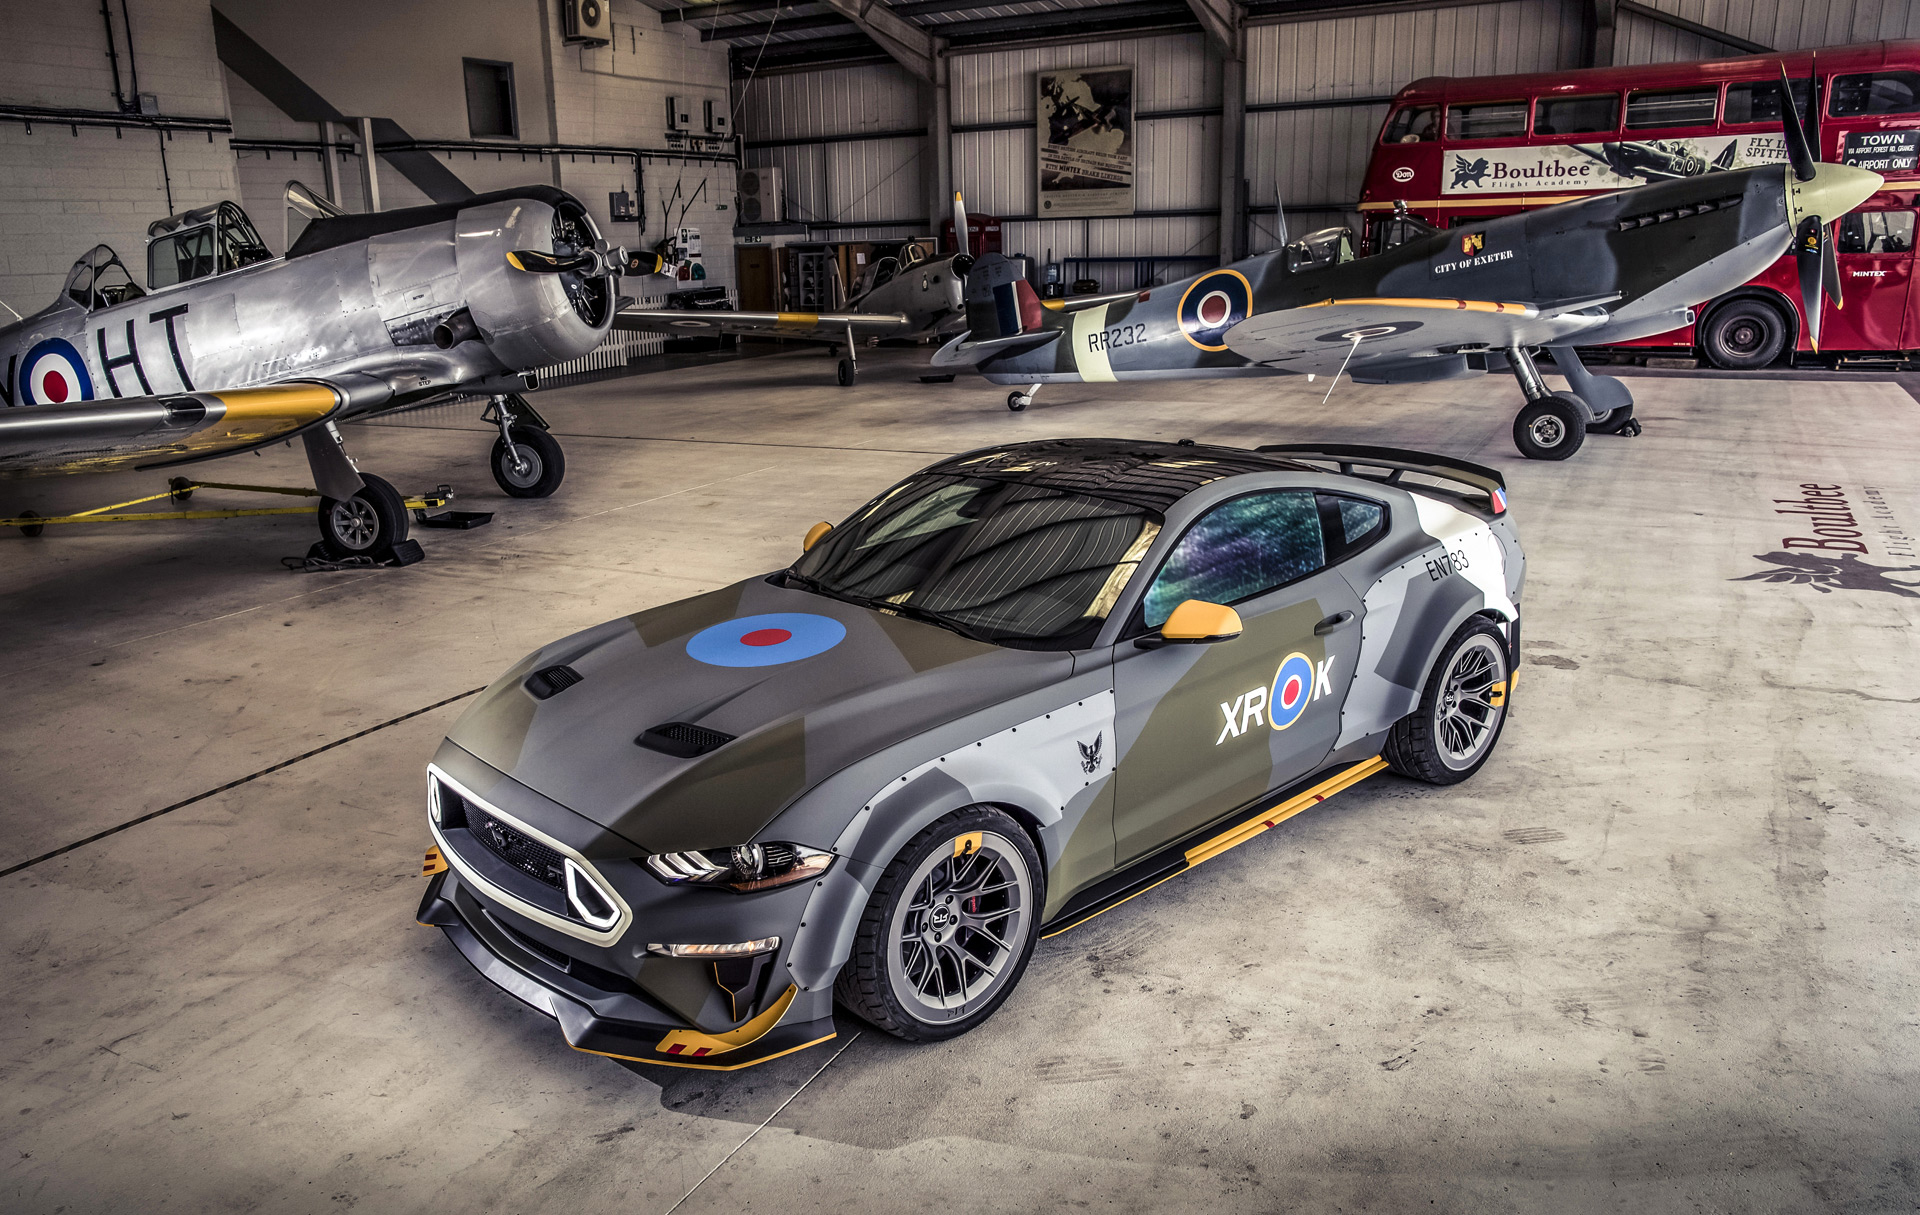 2018-eagle-squadron-ford-mustang-gt_100666443_h.jpeg